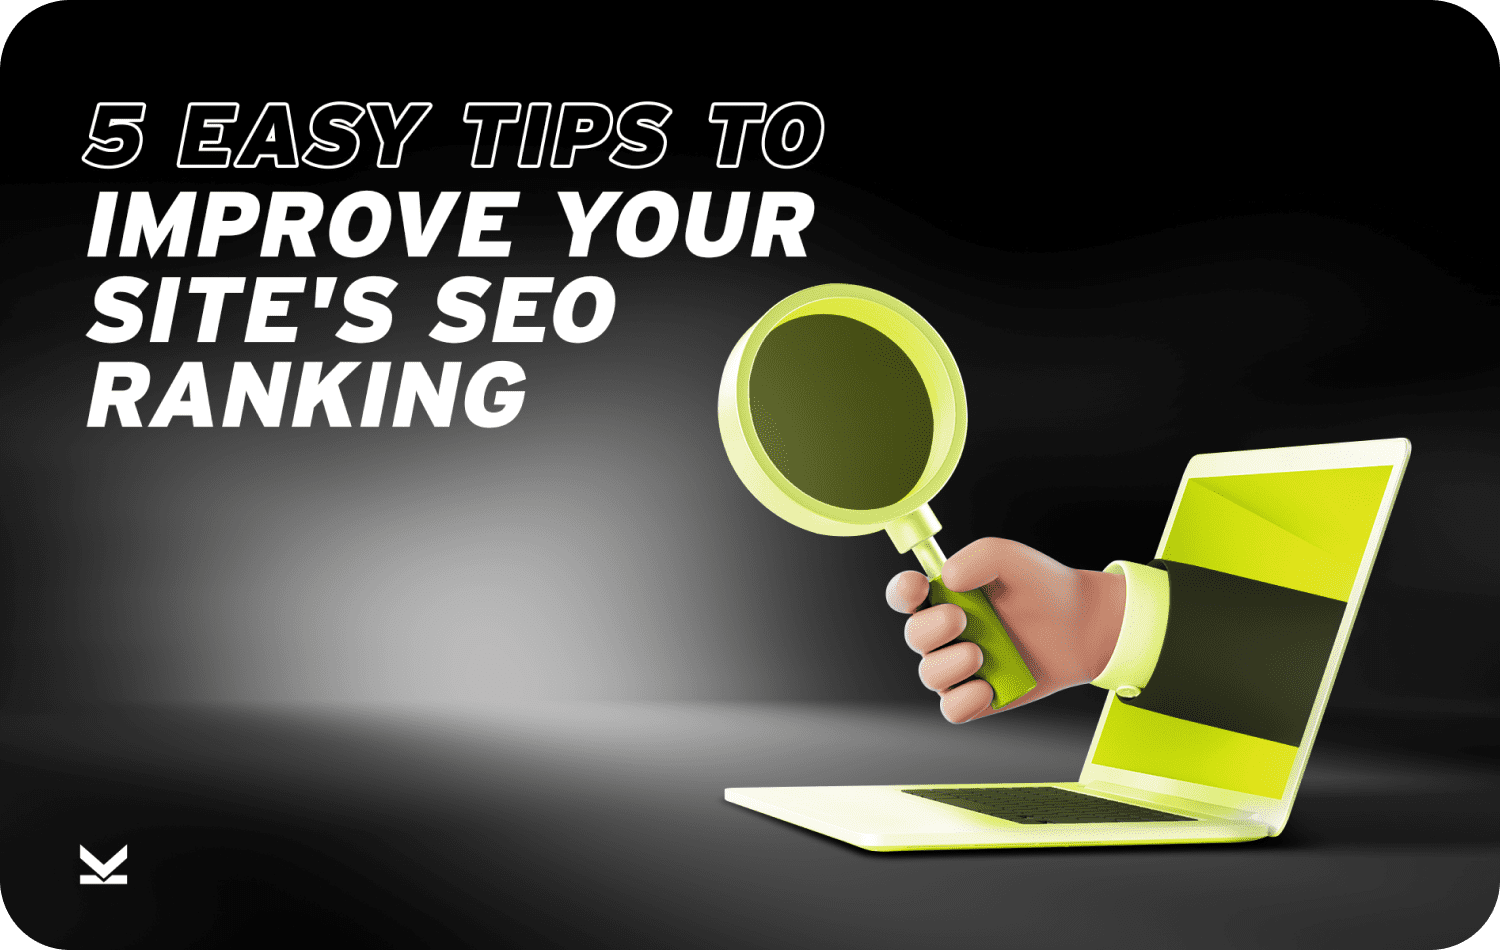 5 Easy Tips to Improve Your Site’s SEO Ranking